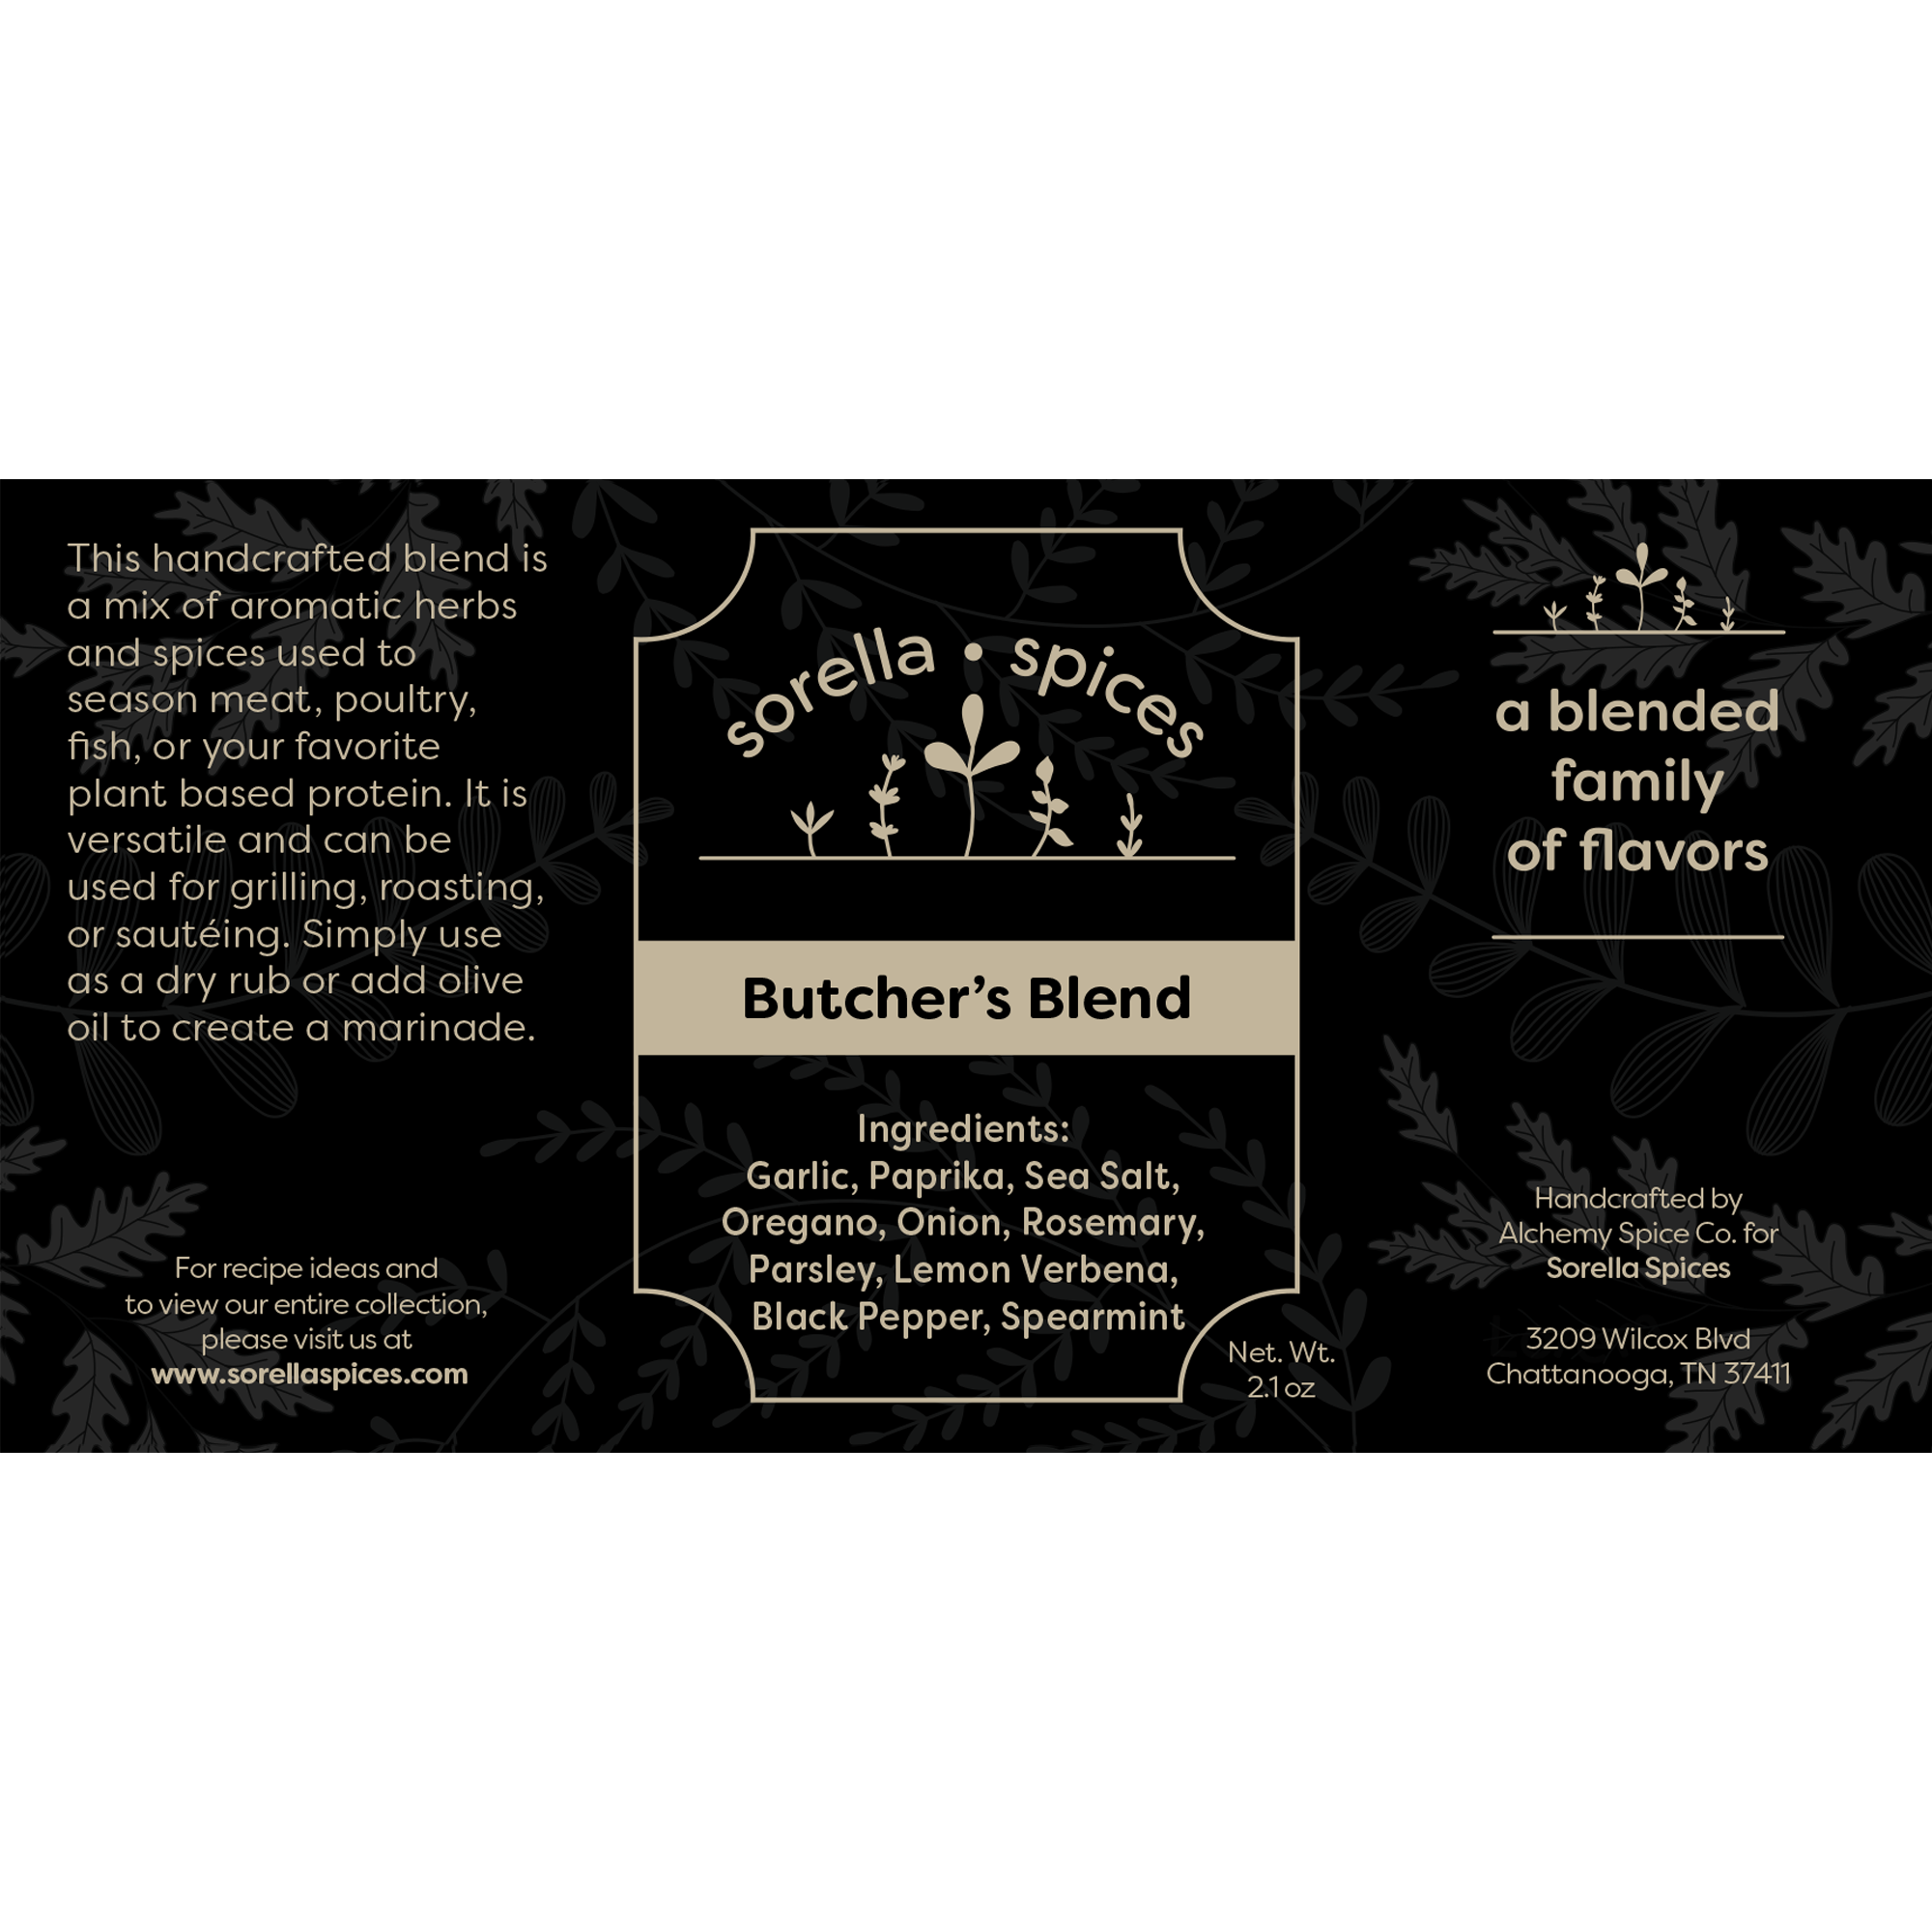 Sorella Spices Butcher's Blend Ingredients, excellent for steaks, beef, lamb, chicken, and more